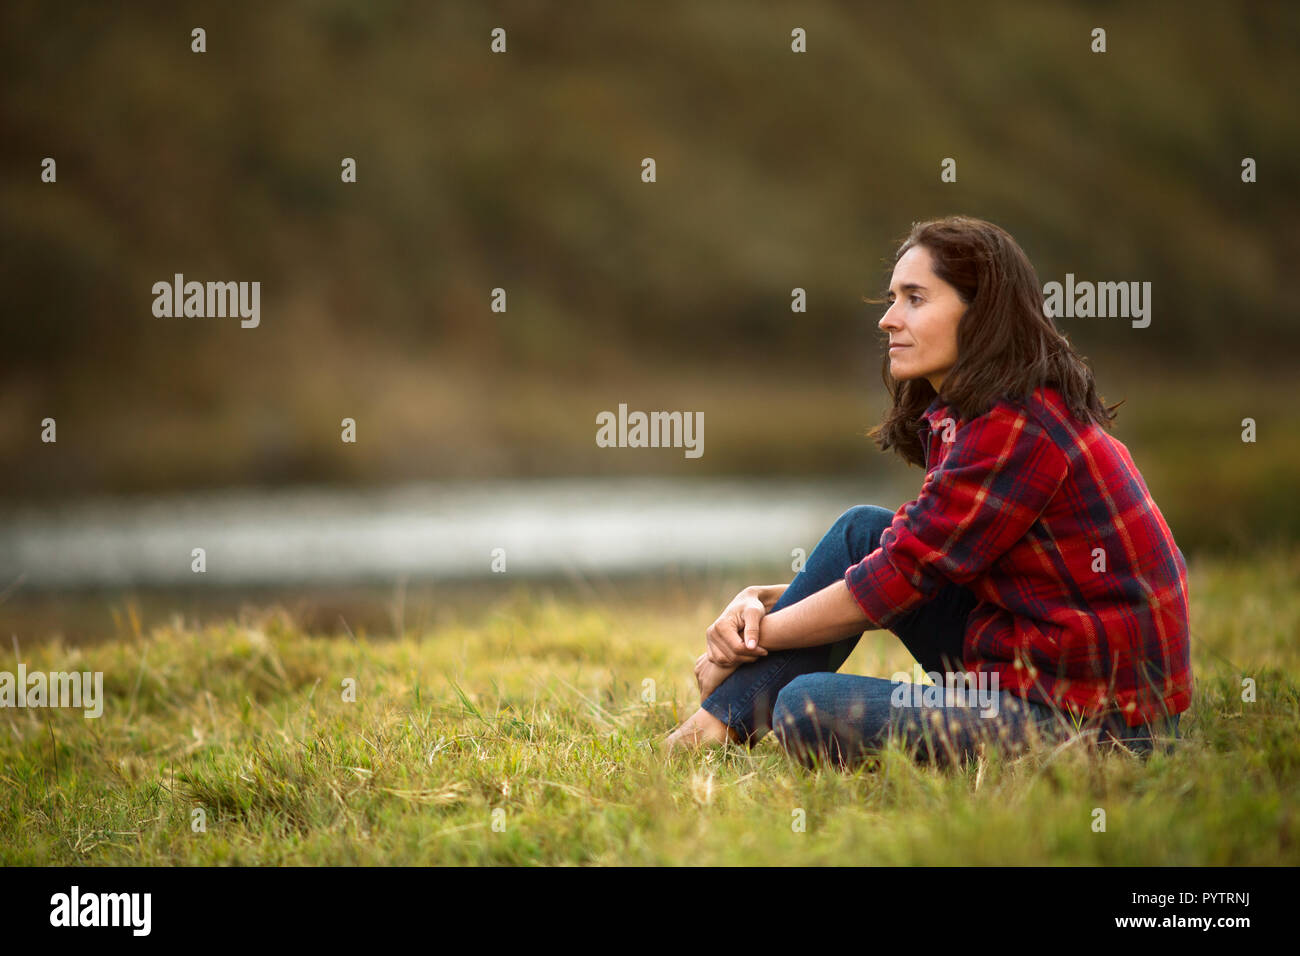 Portrait of a thoughtful mid adult woman sitting in a grassy field. Stock Photo